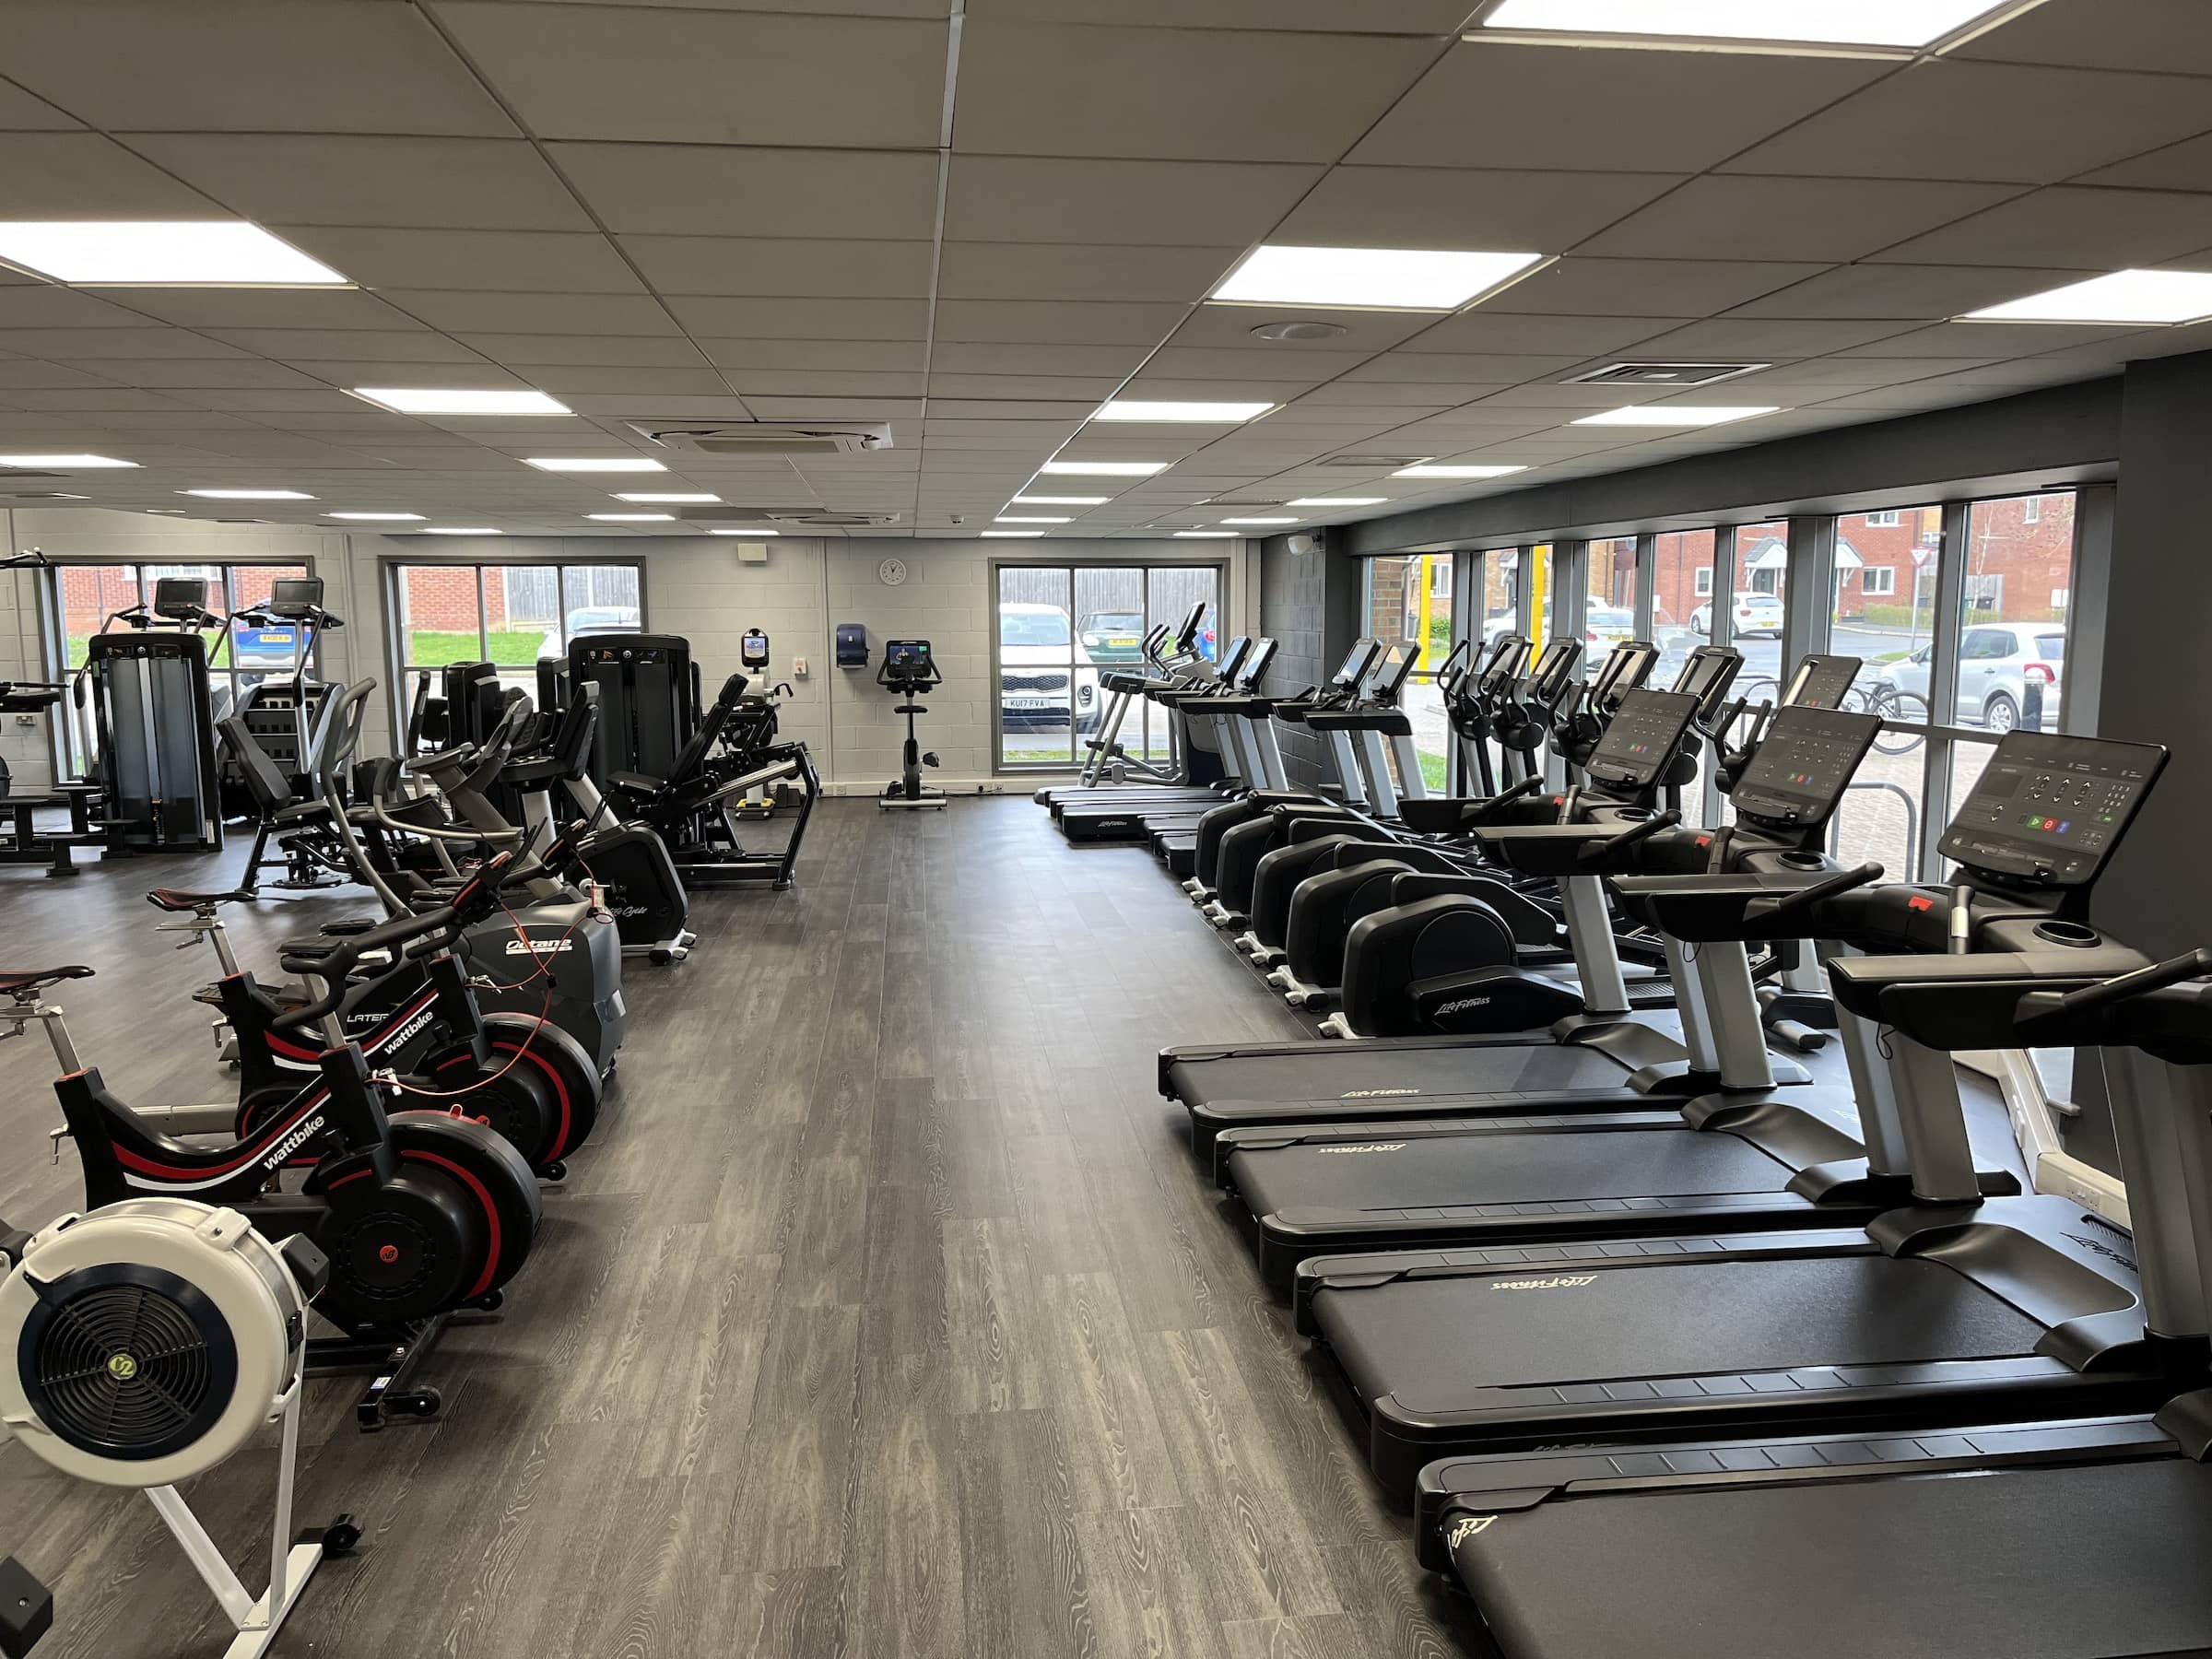 Gym at towcester centre for leisure